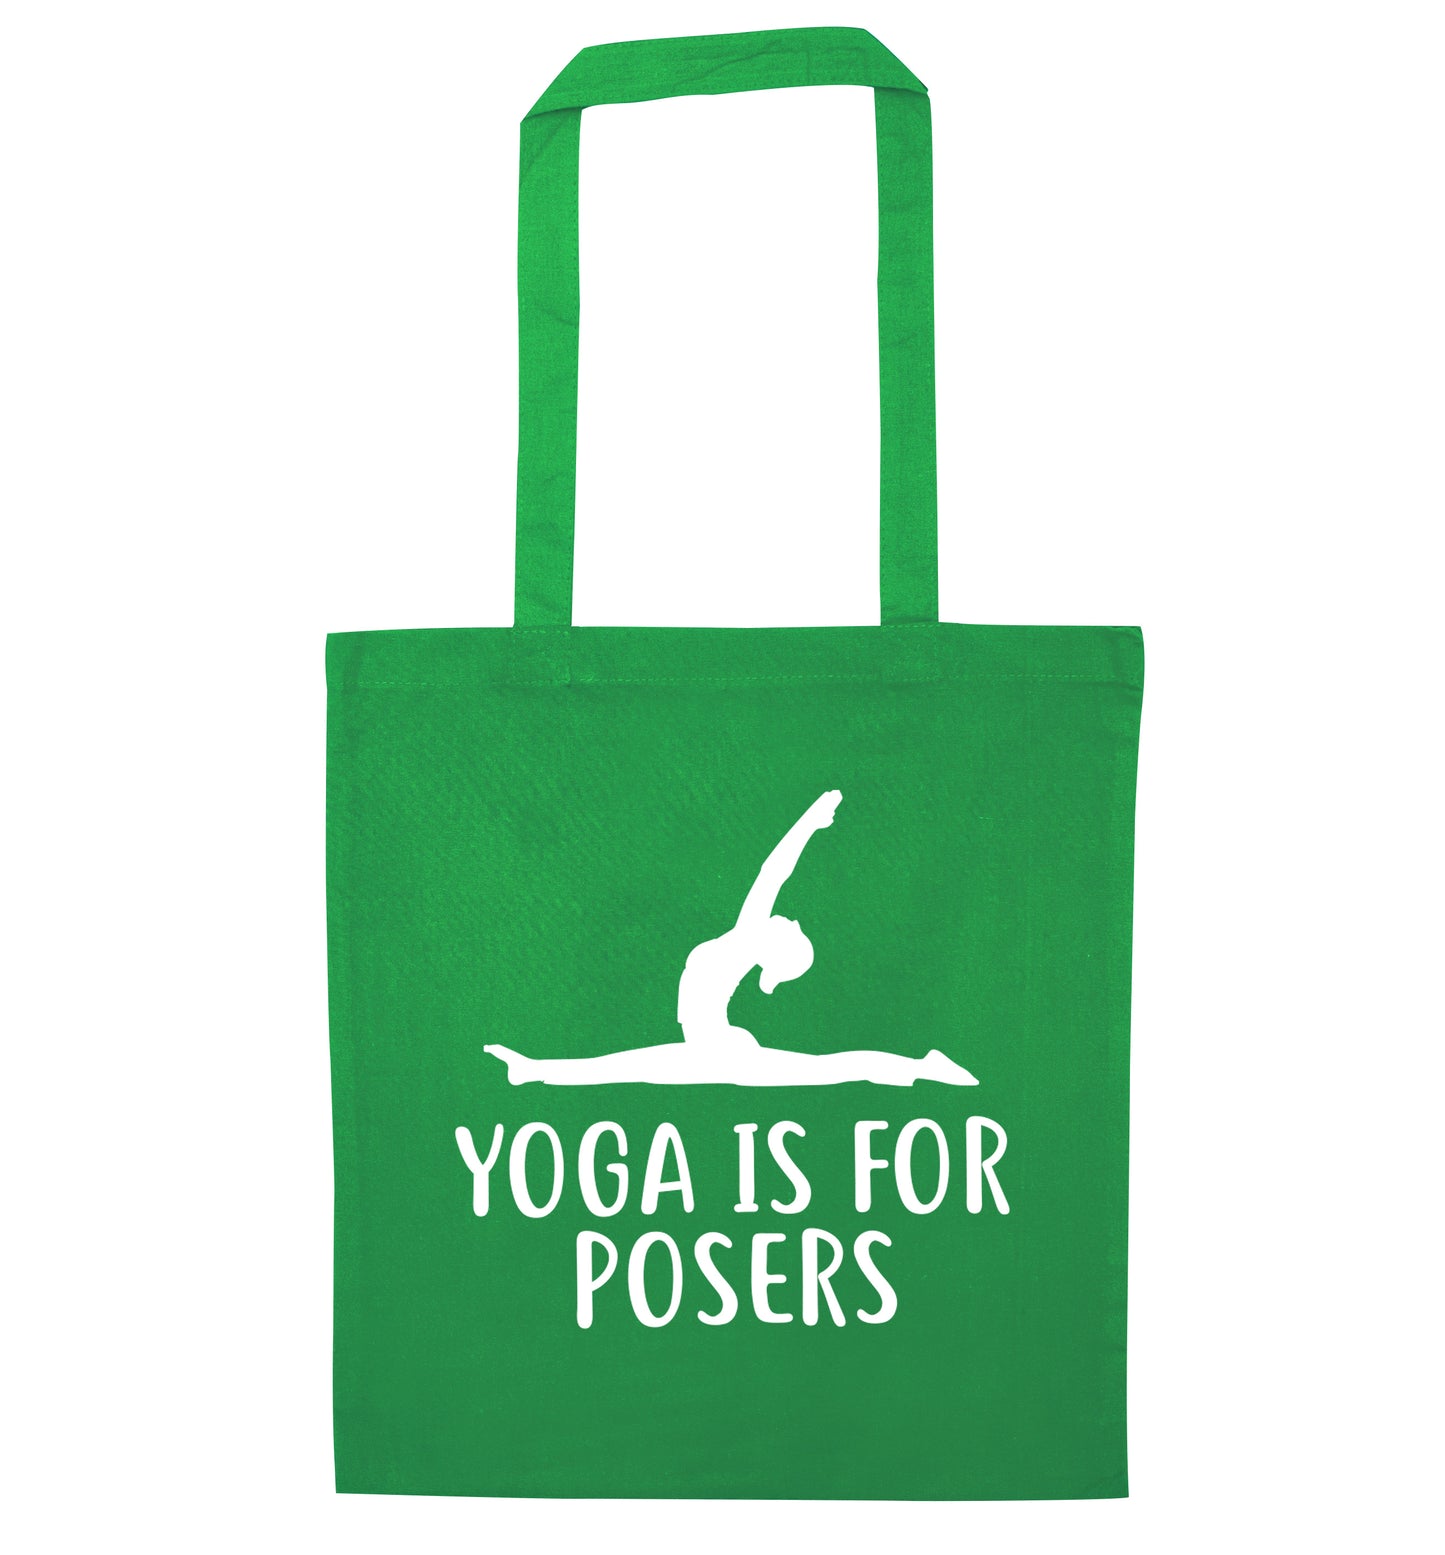 Yoga is for posers green tote bag